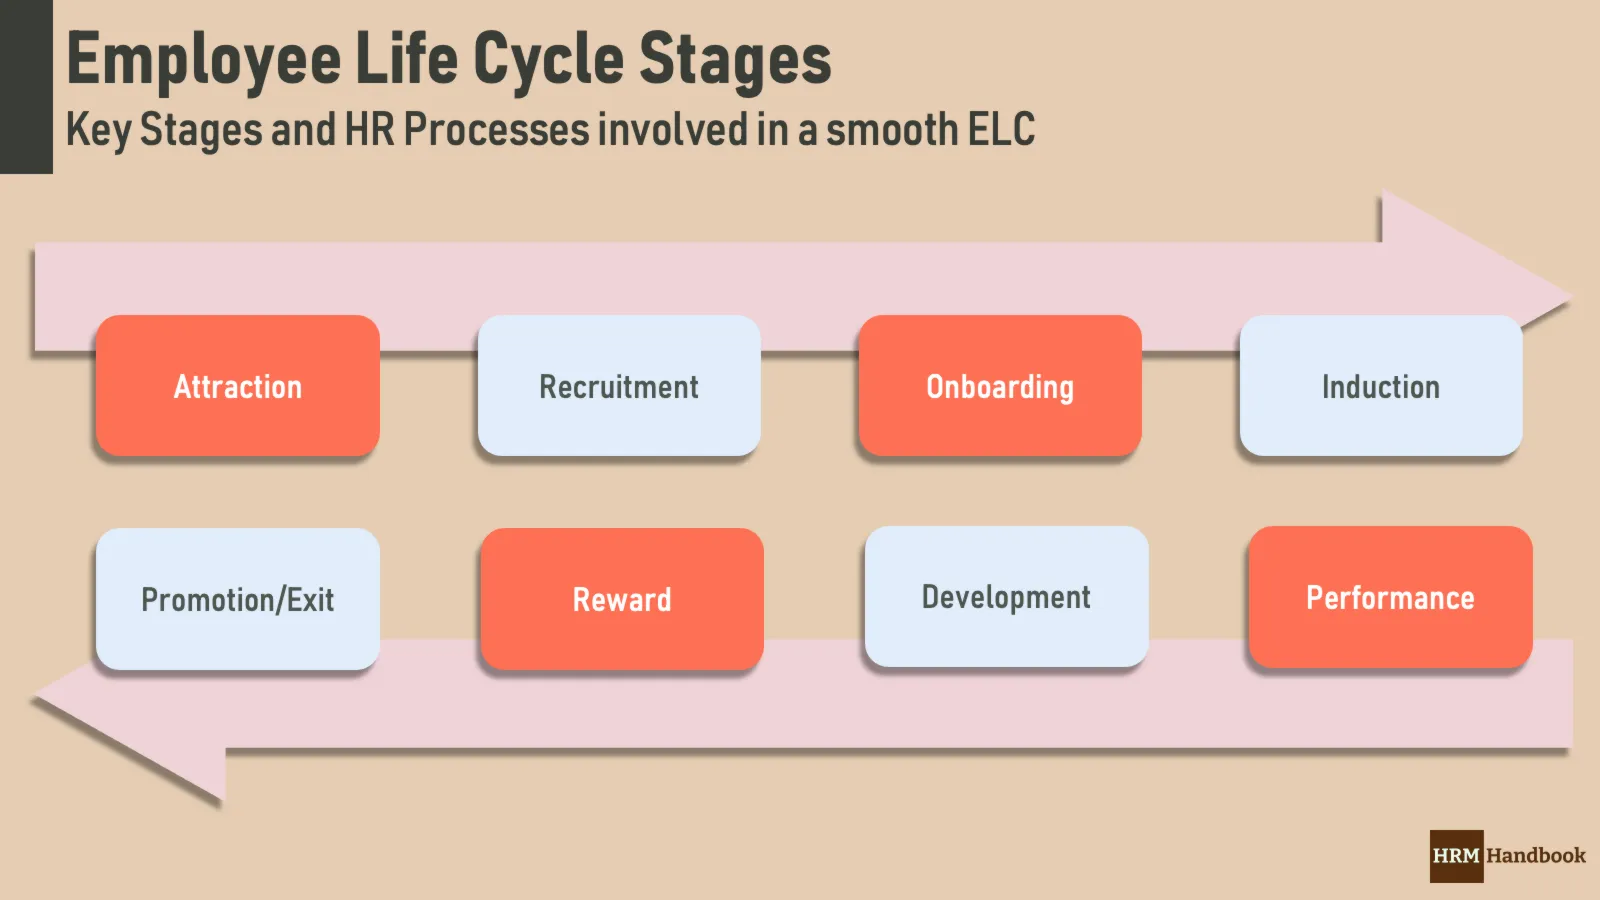 Most Common Employee Life Cycle Stages